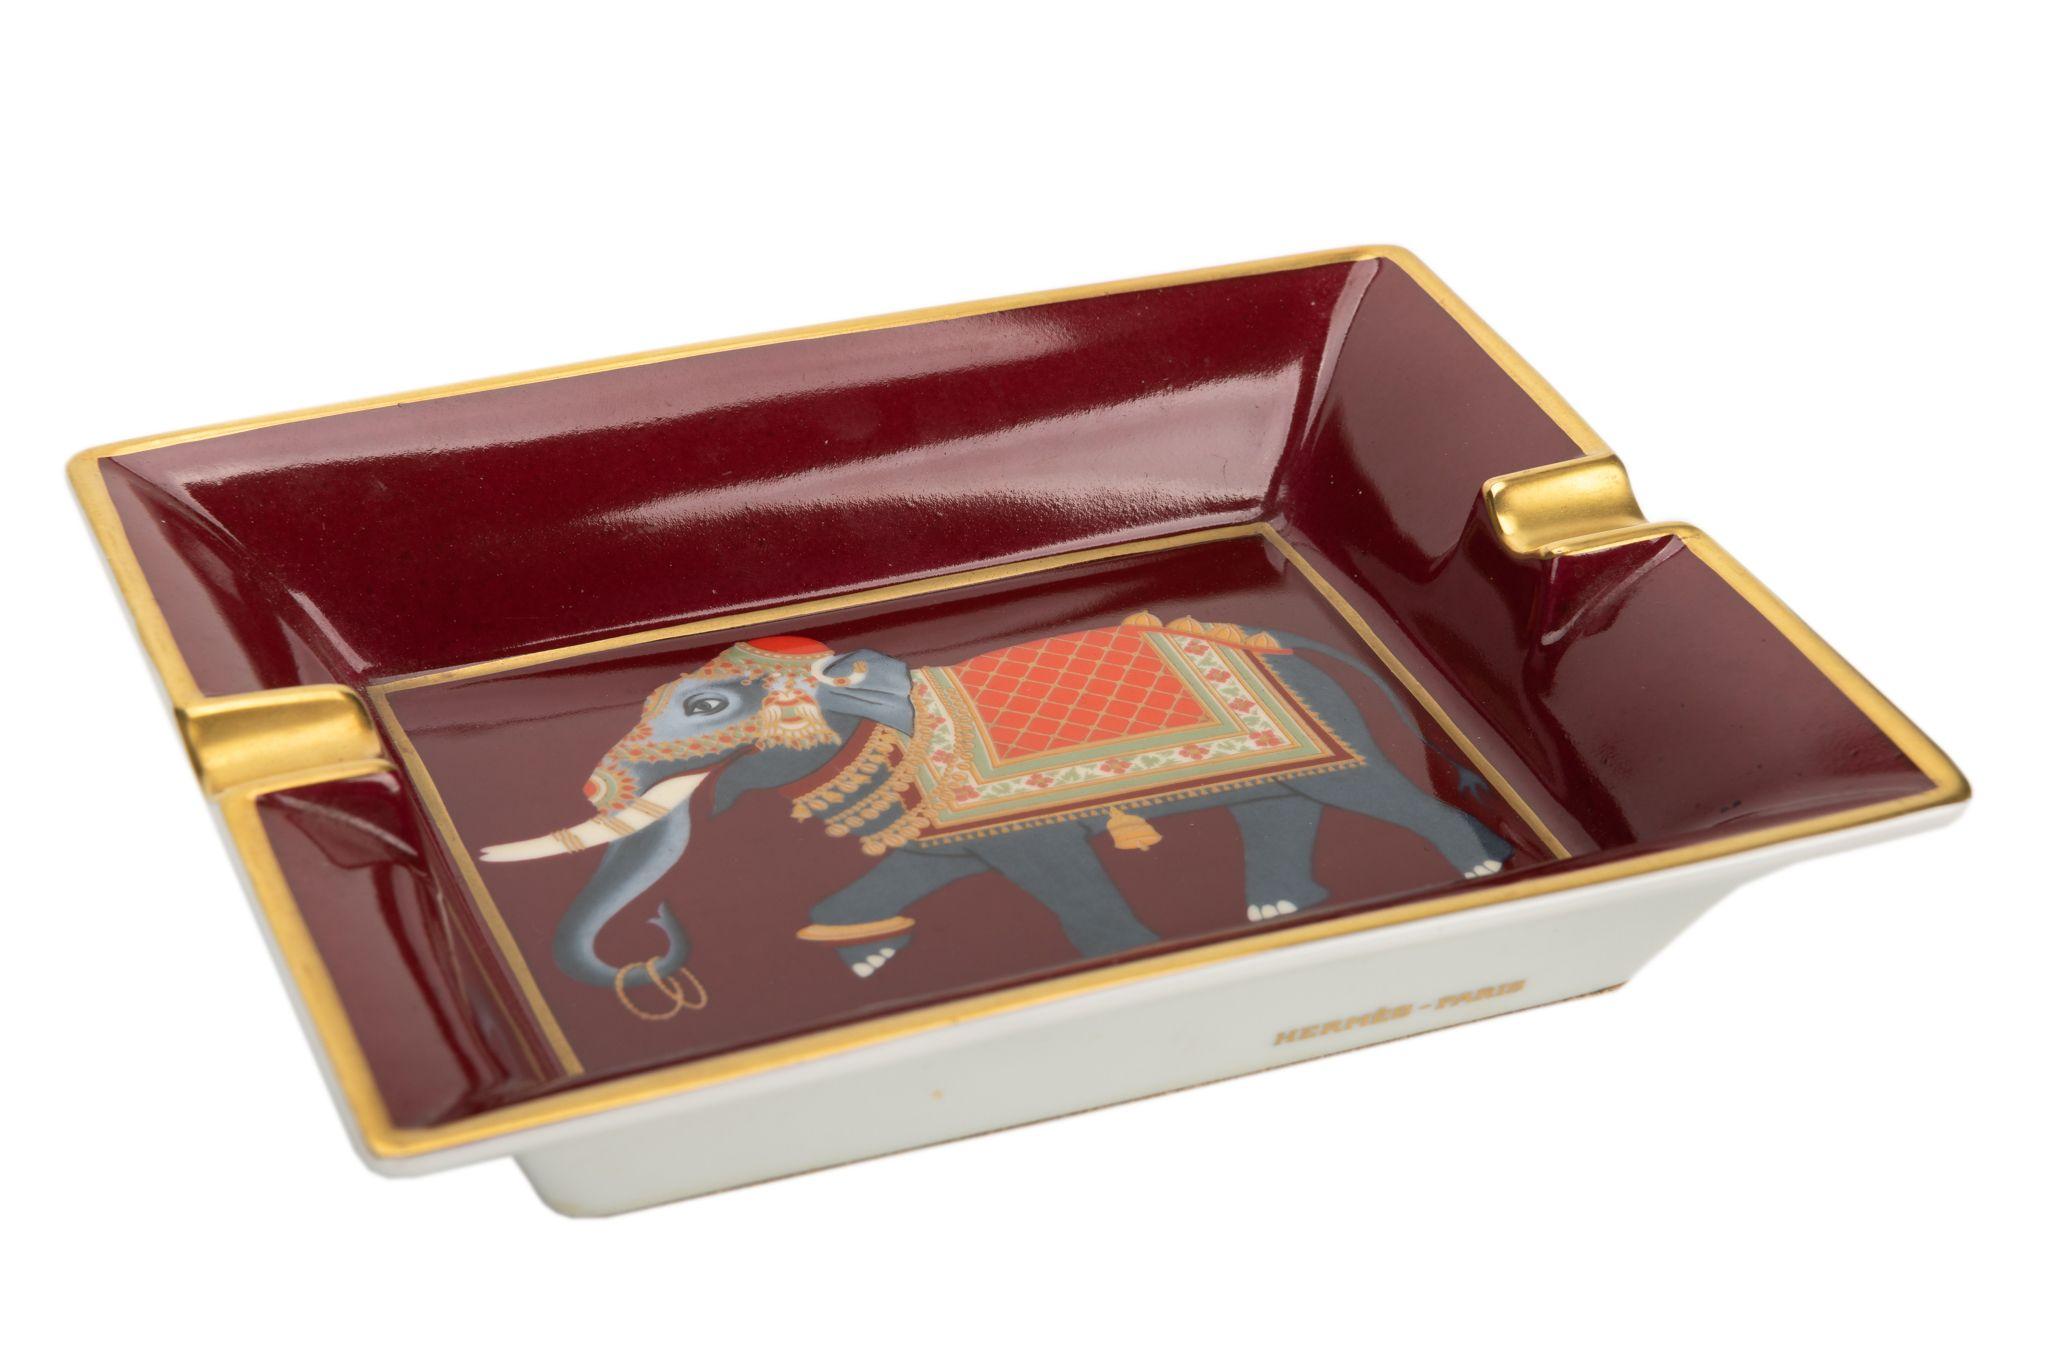 Hermès vintage ashtray in the main color burgundy. The center of the piece shows a print of a grey elephant with a colored blanket. Suede stamped bottom. The piece is in excellent condition.